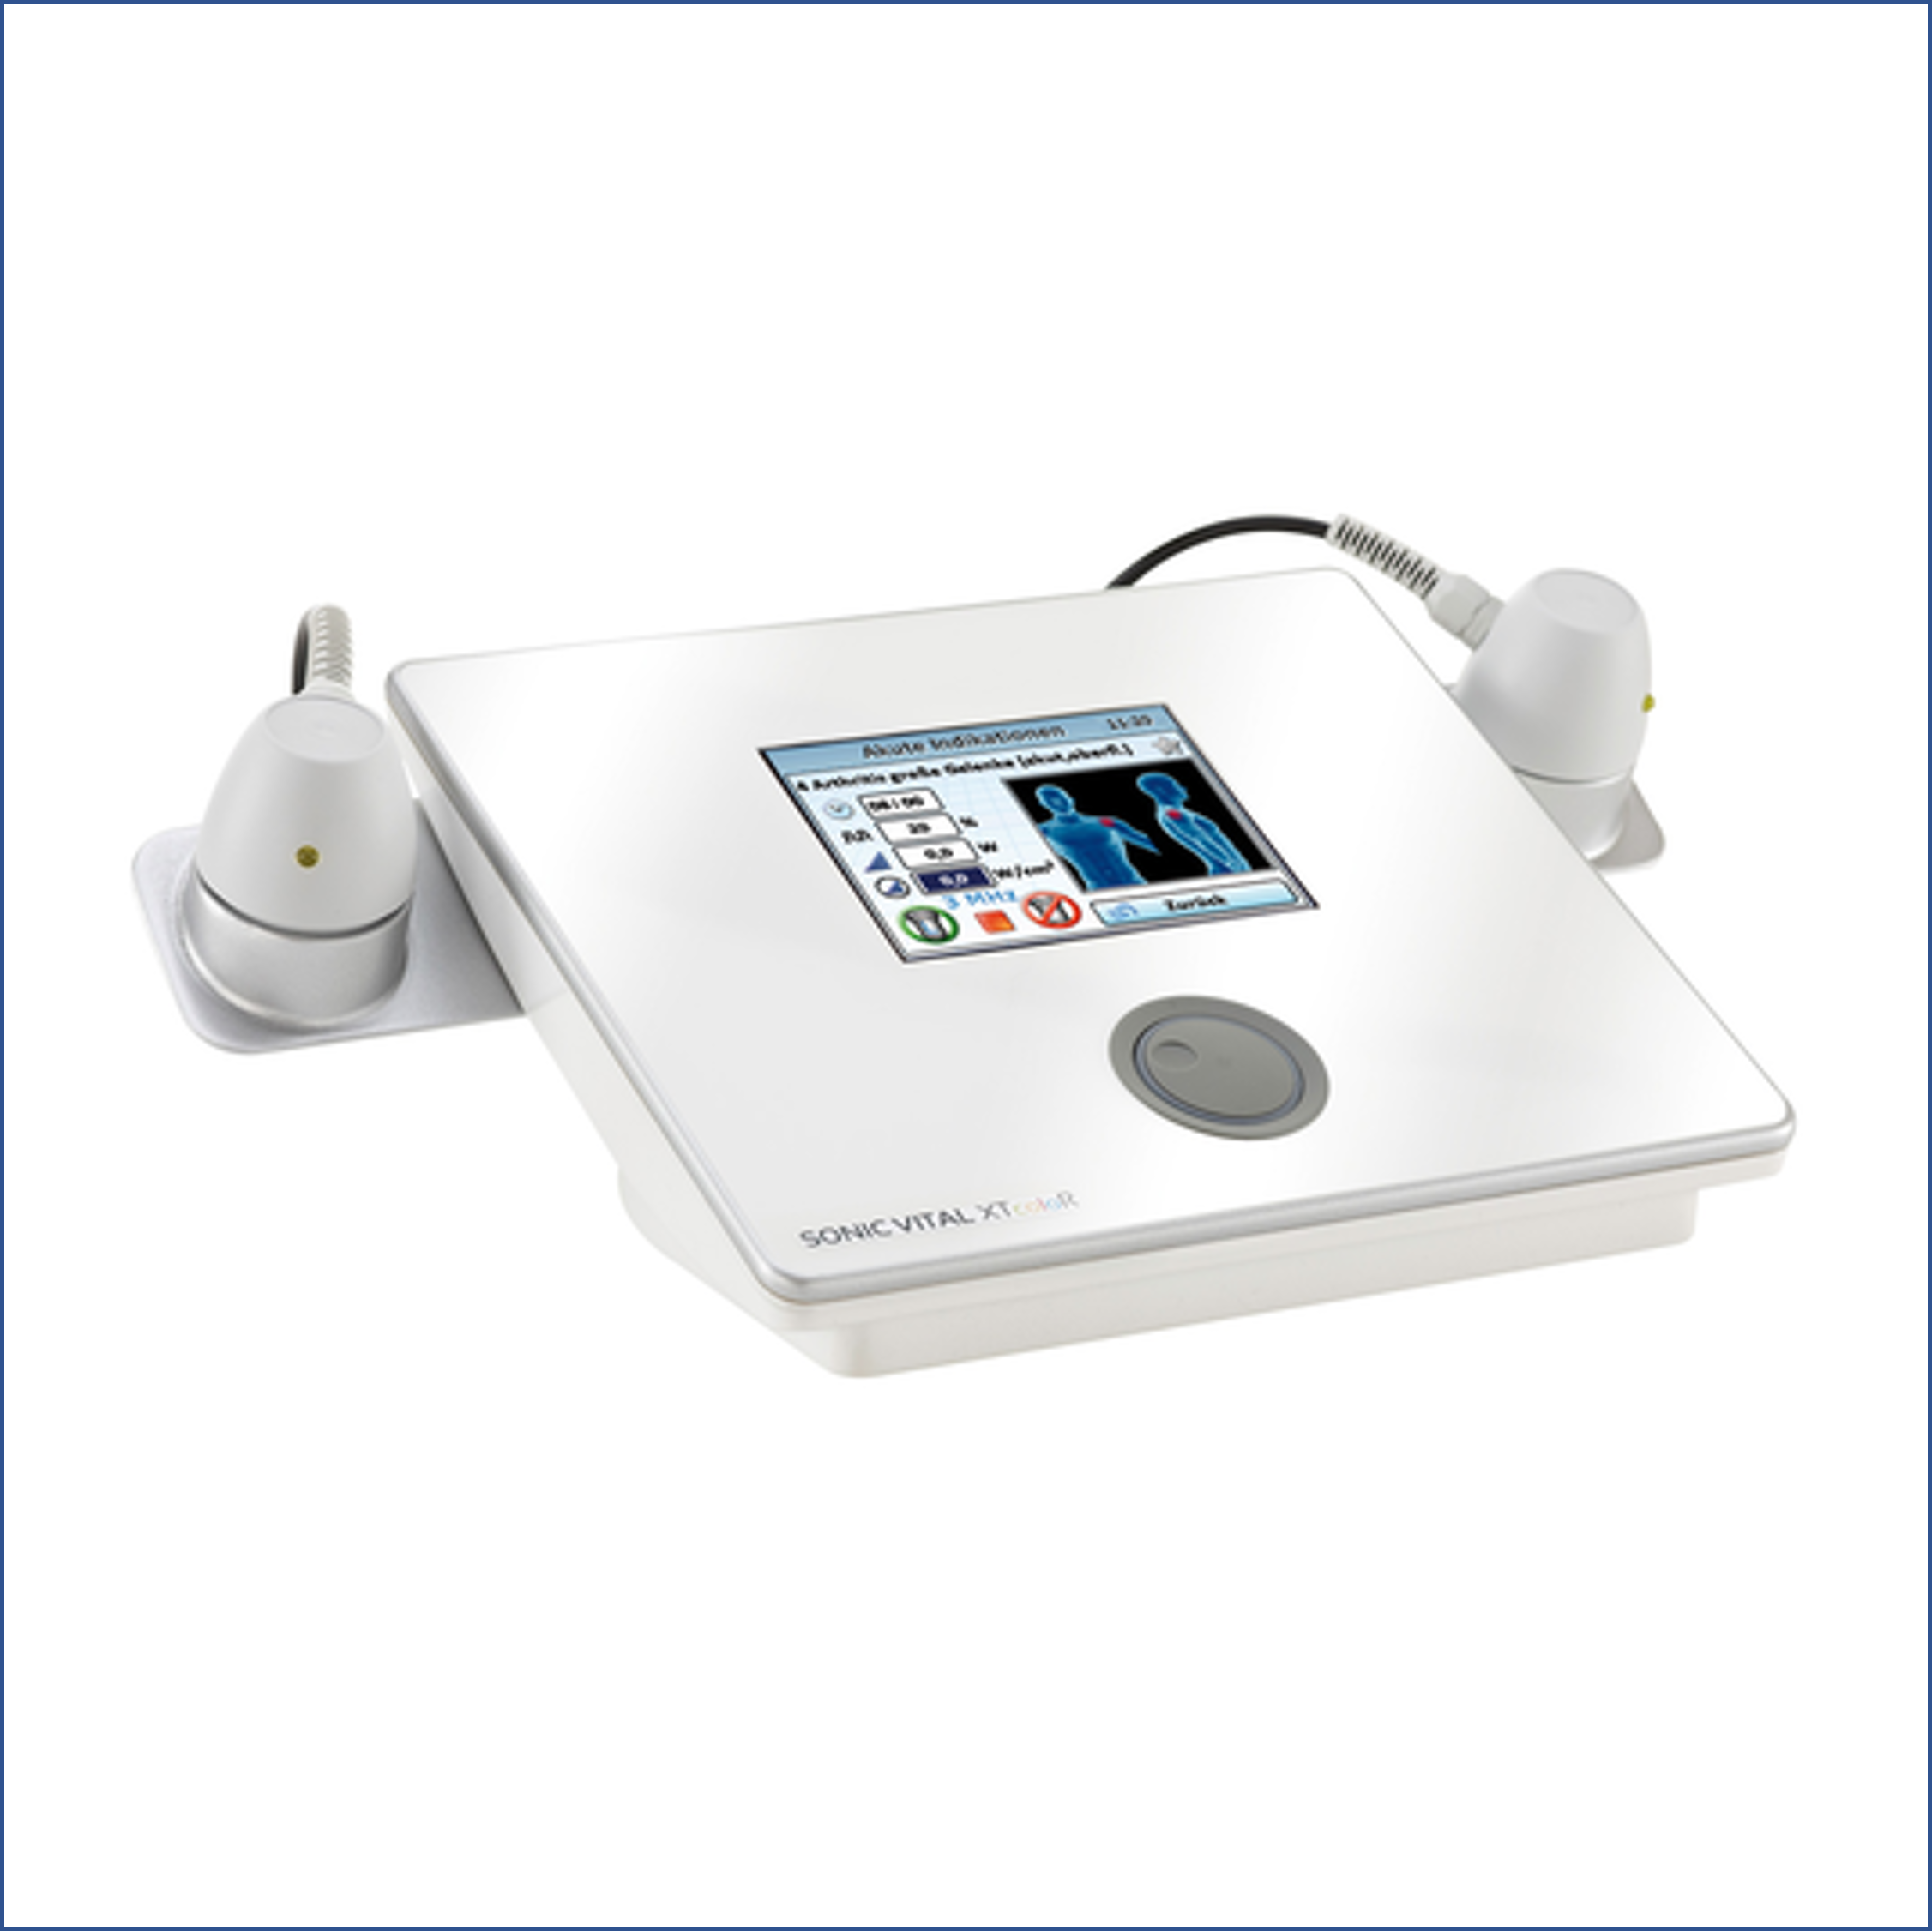 SONICvital "XTcoloR"-Ultrasound-